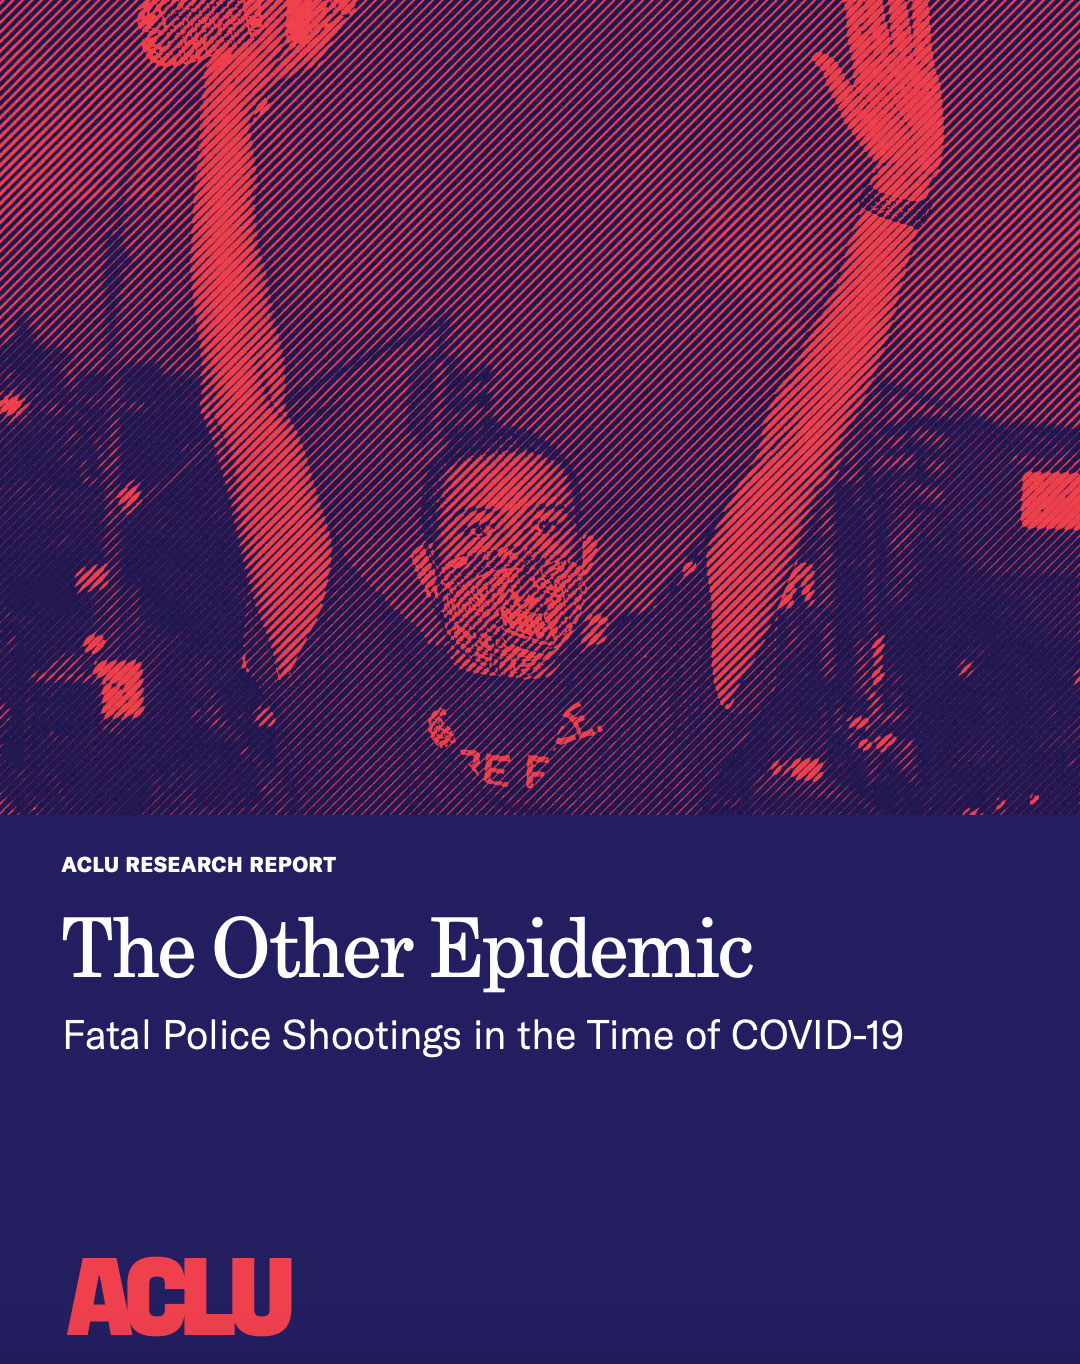 The Other Epidemic: Fatal Police Shootings in the Time of COVID-19